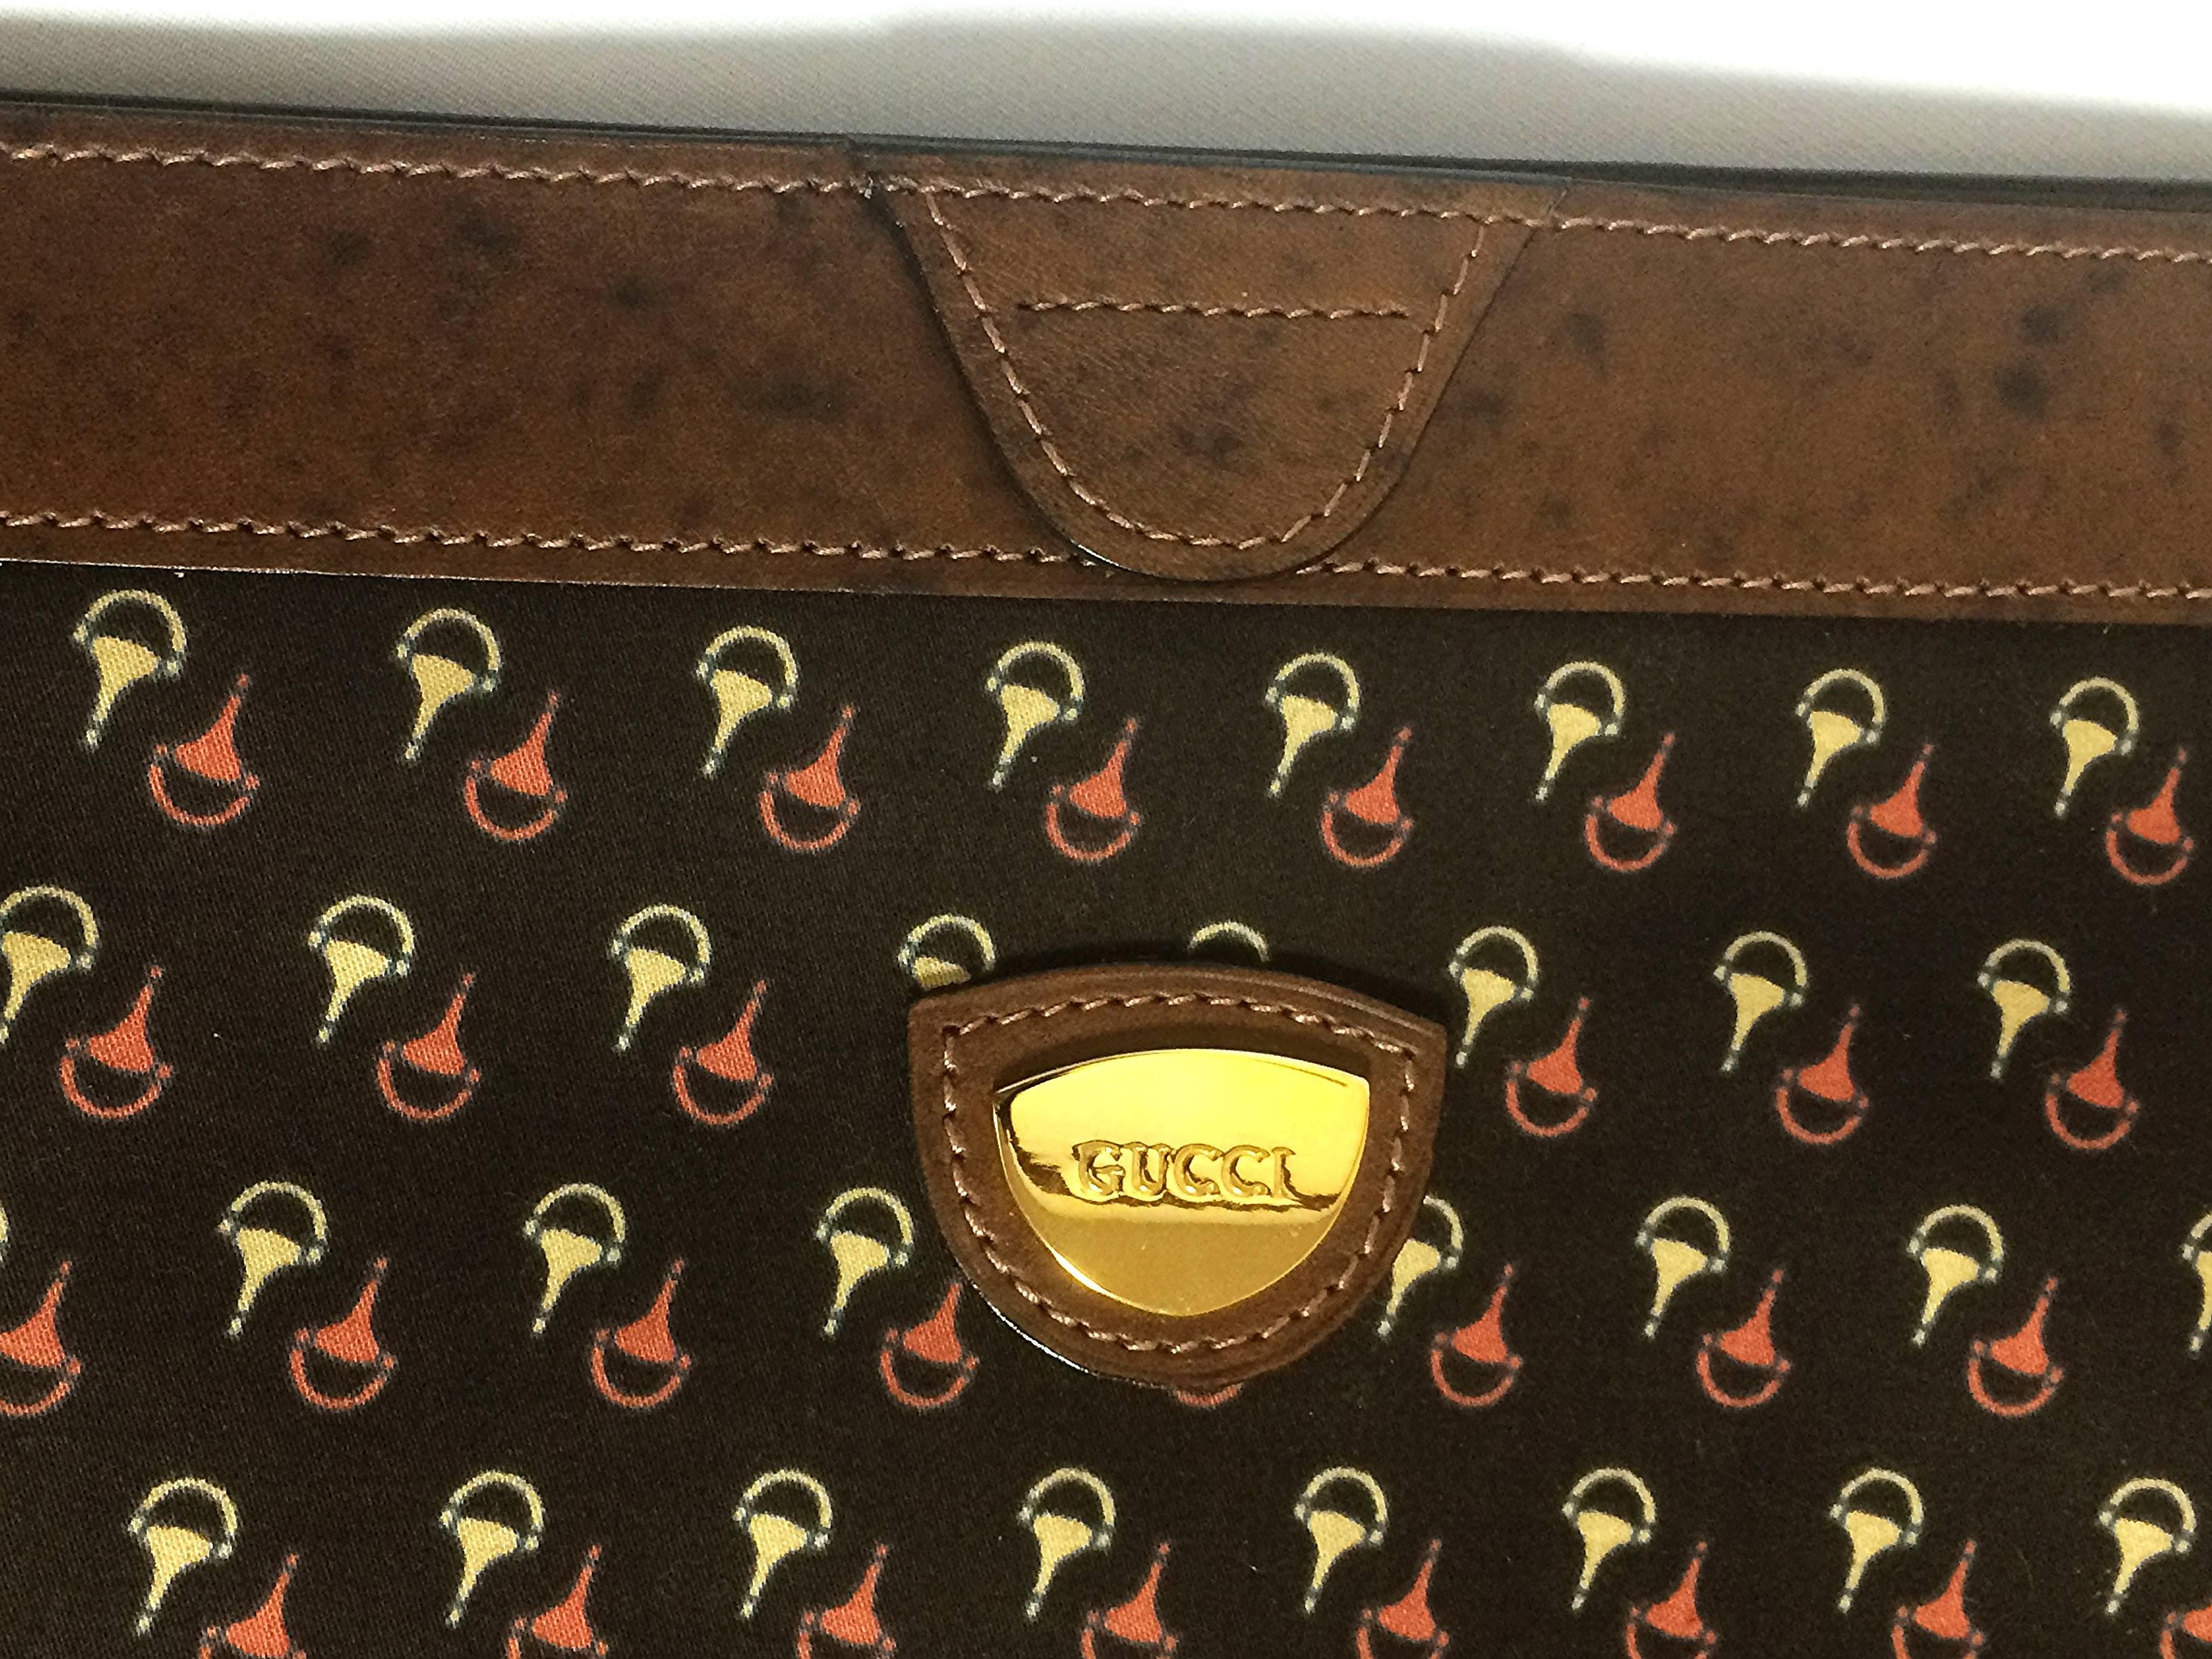 Black Vintage Gucci brown toiletry clutch pouch with all over horsebit print